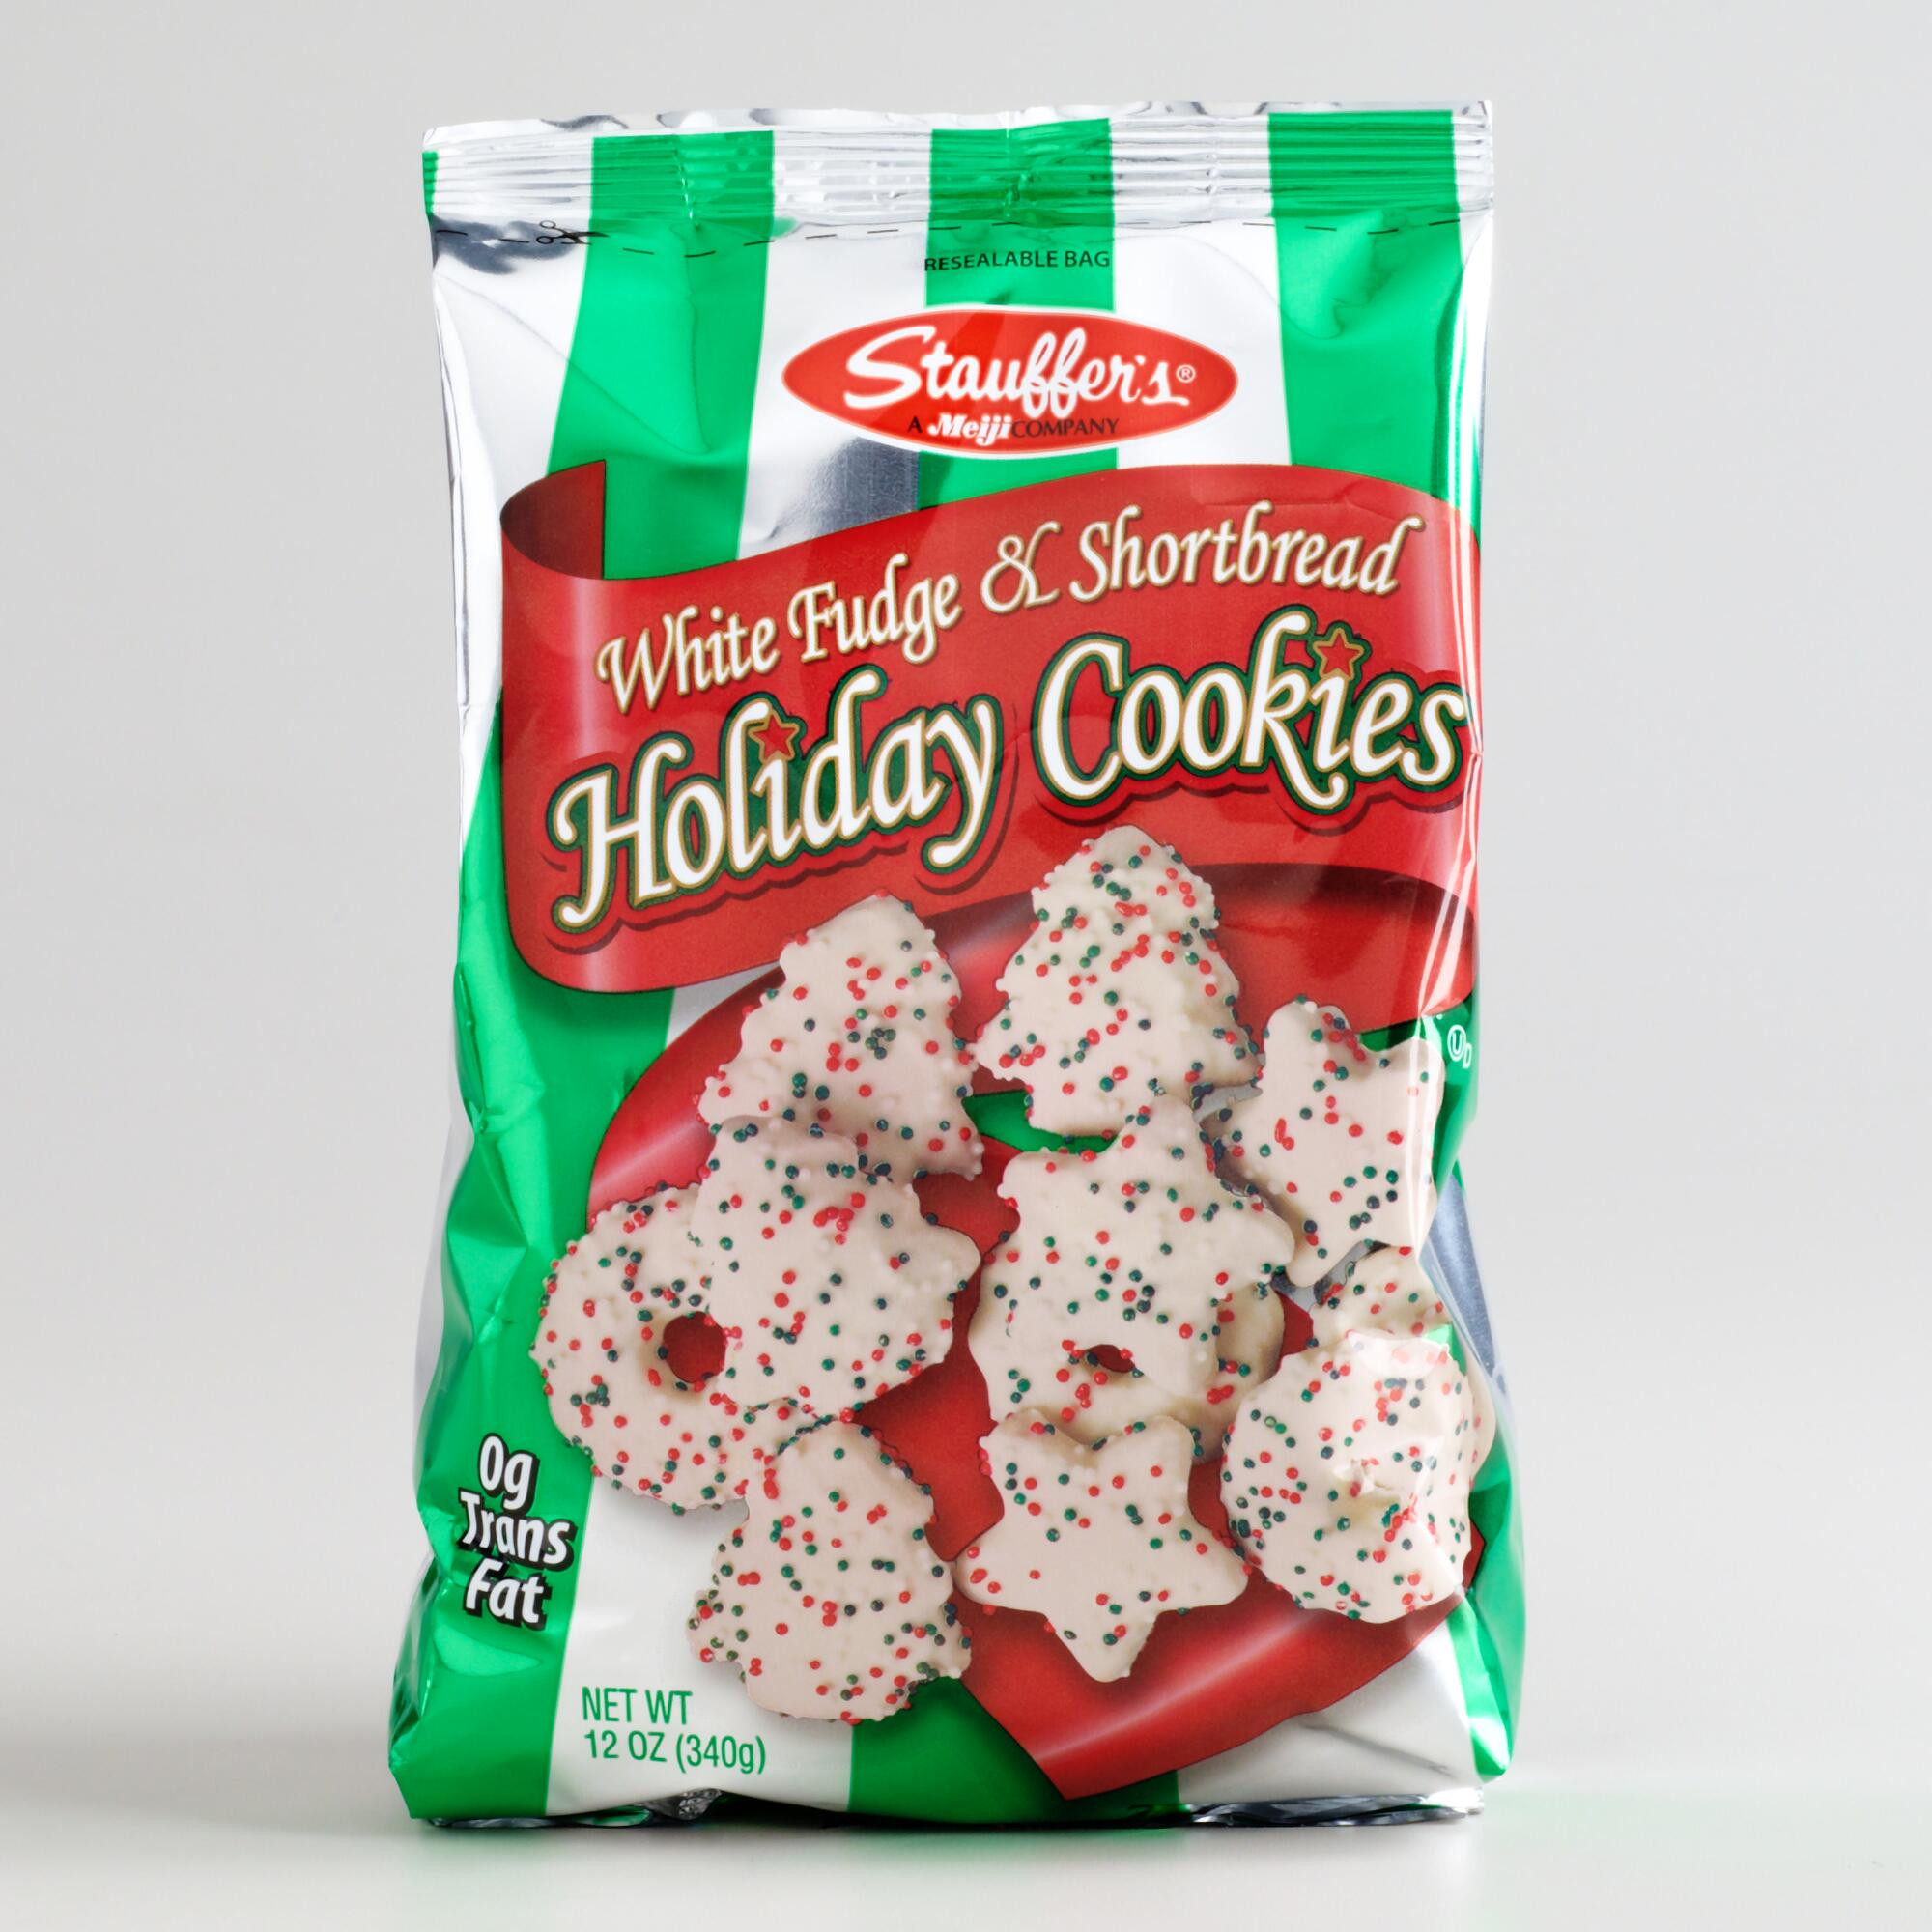 Stauffers Christmas Cookies
 Stauffer s White Fudge and Shortbread Holiday Cookies